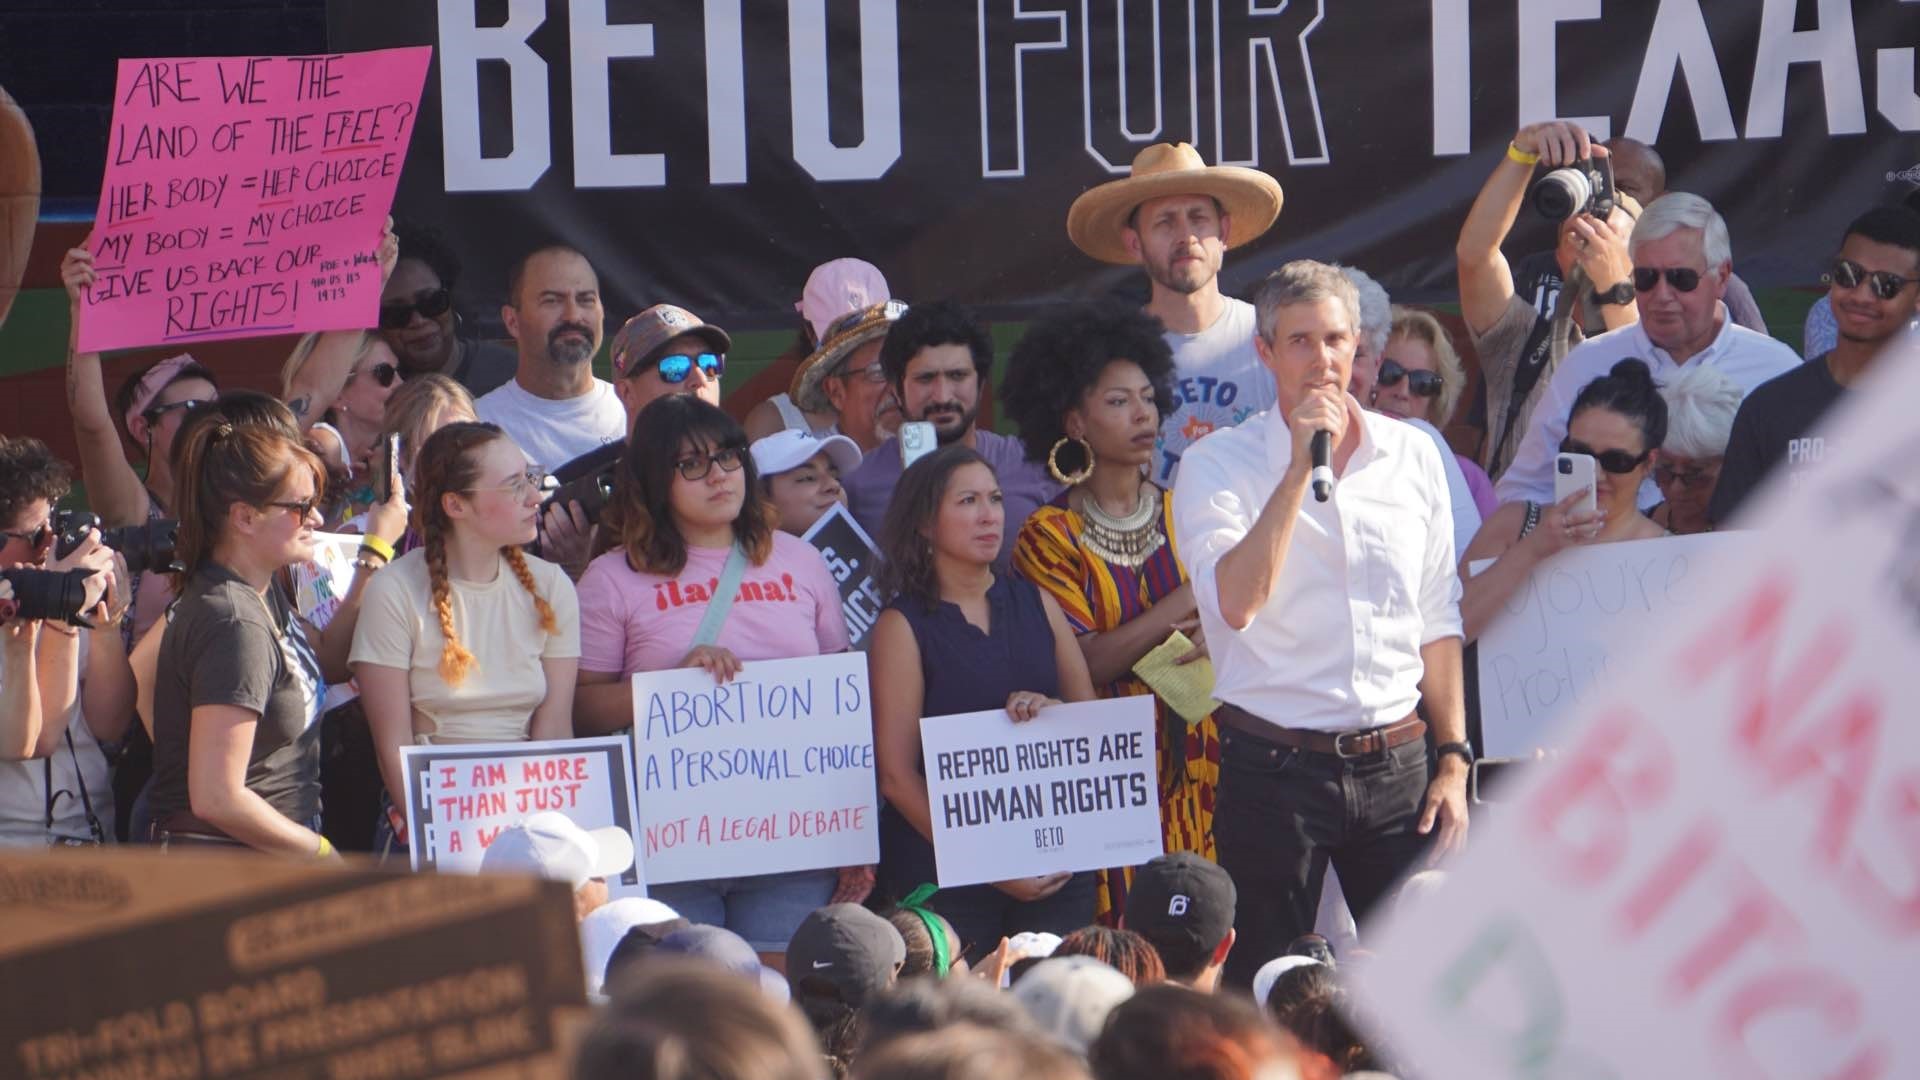 O'Rourke was joined by abortion rights organizations at the event on Sunday.